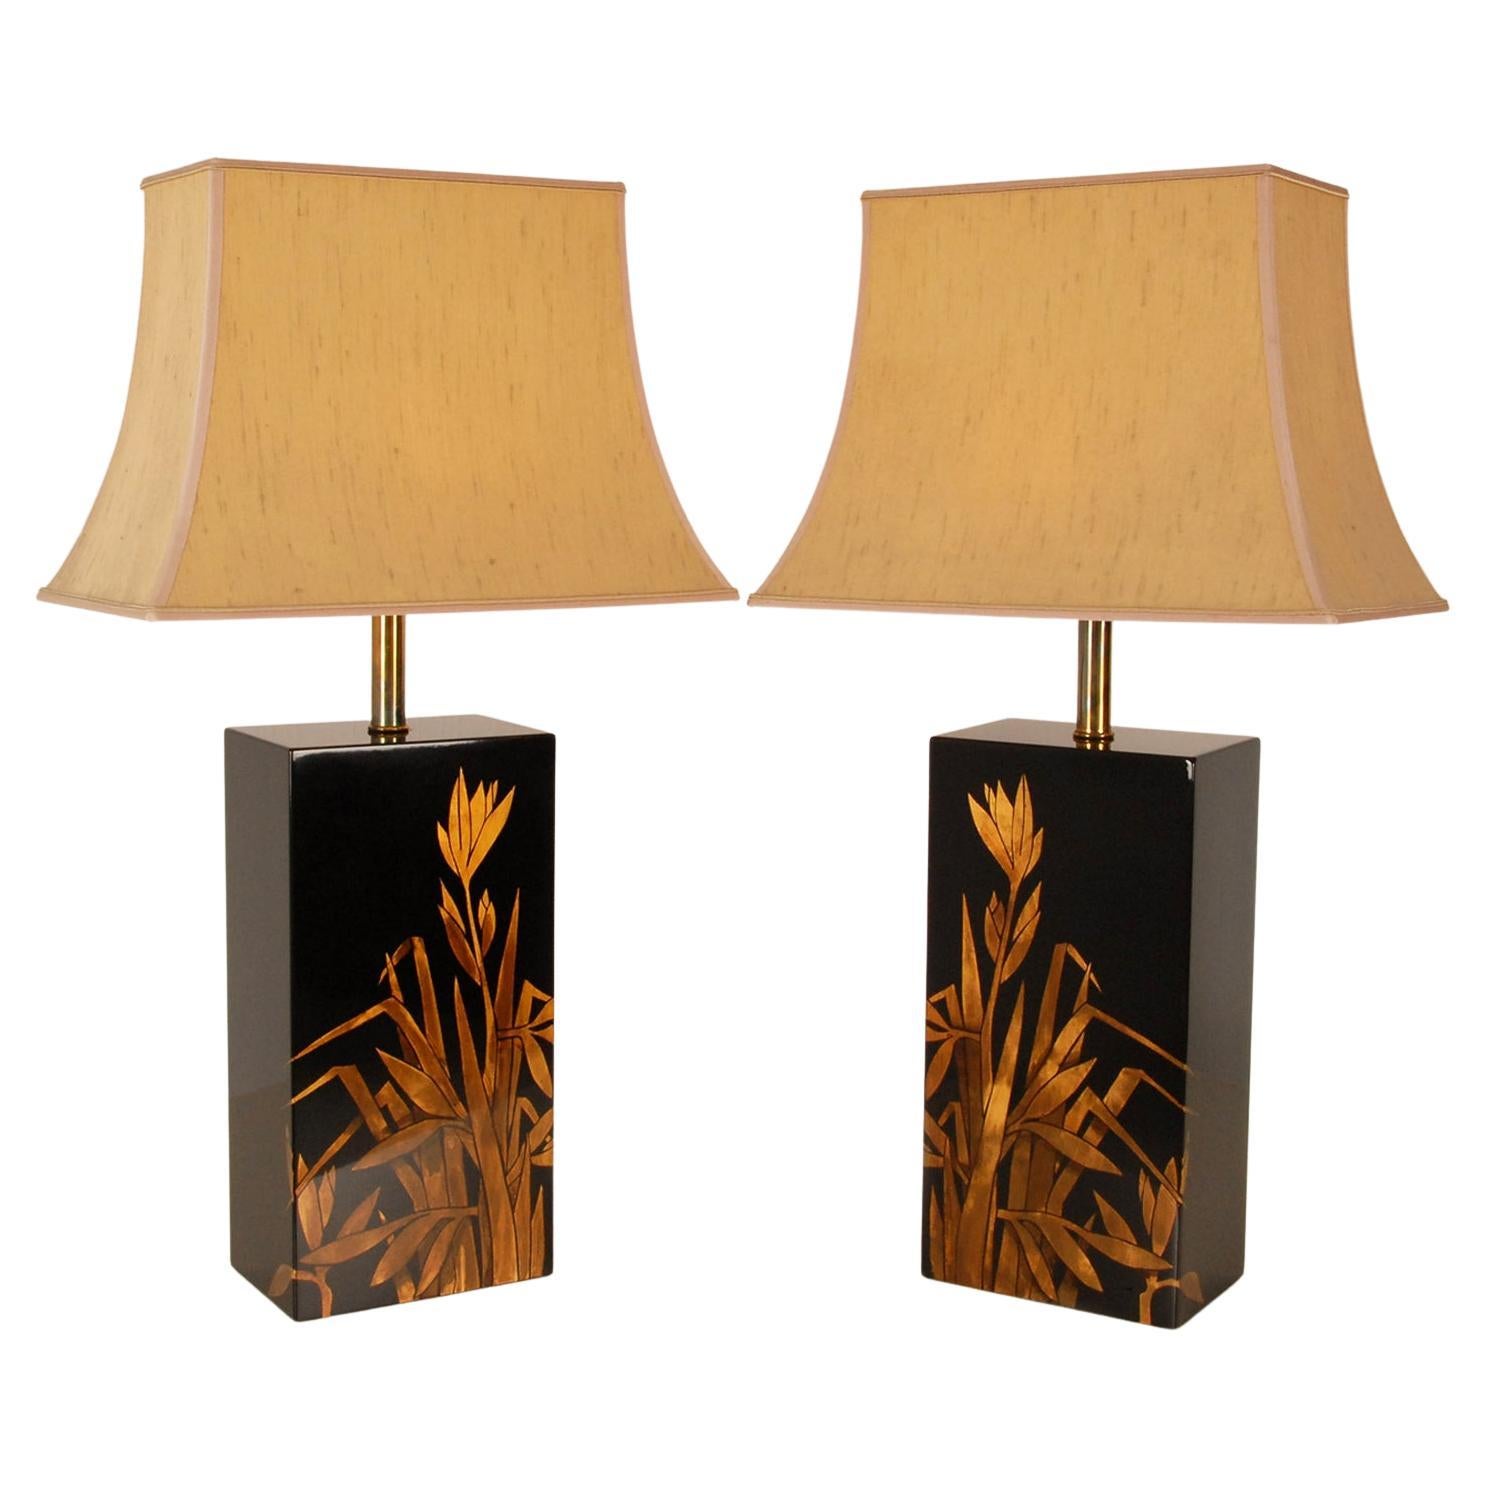 Vintage Chinoiserie Gold and Black lacquer Pagoda Table Lamps Retro 1970s a Pair For Sale